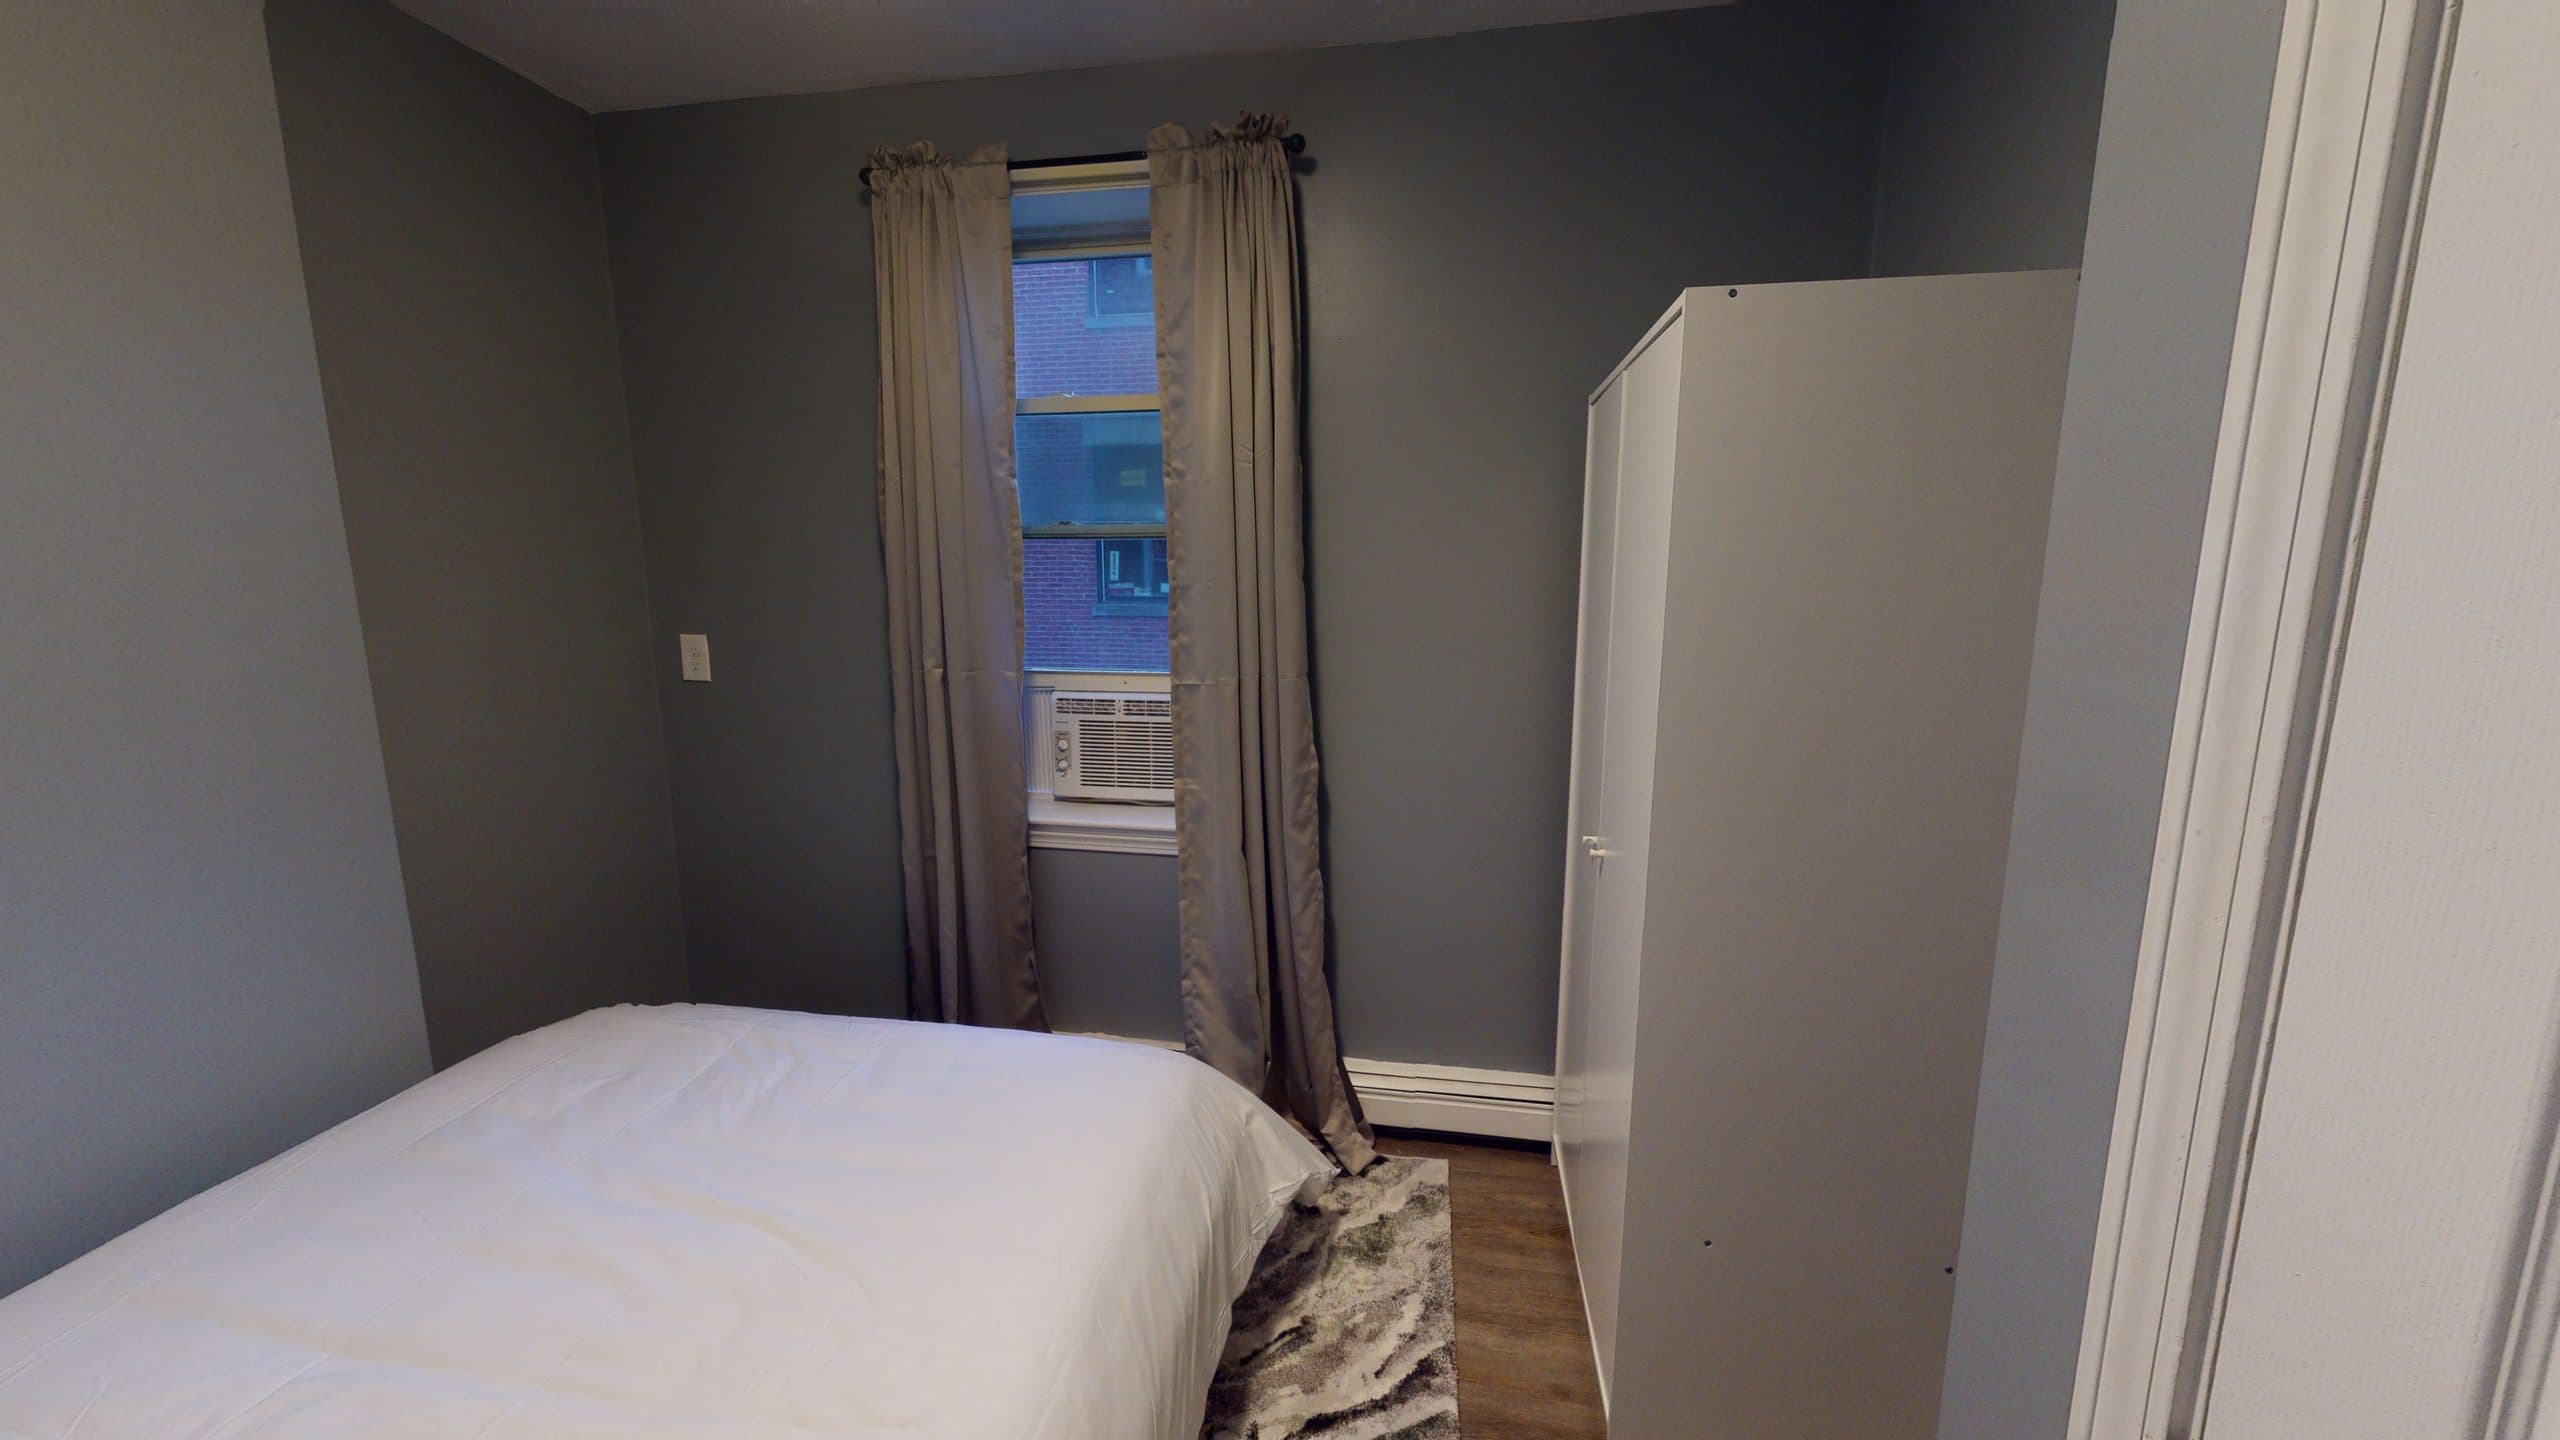 Photo 15 of #1287: Queen Bedroom A at June Homes